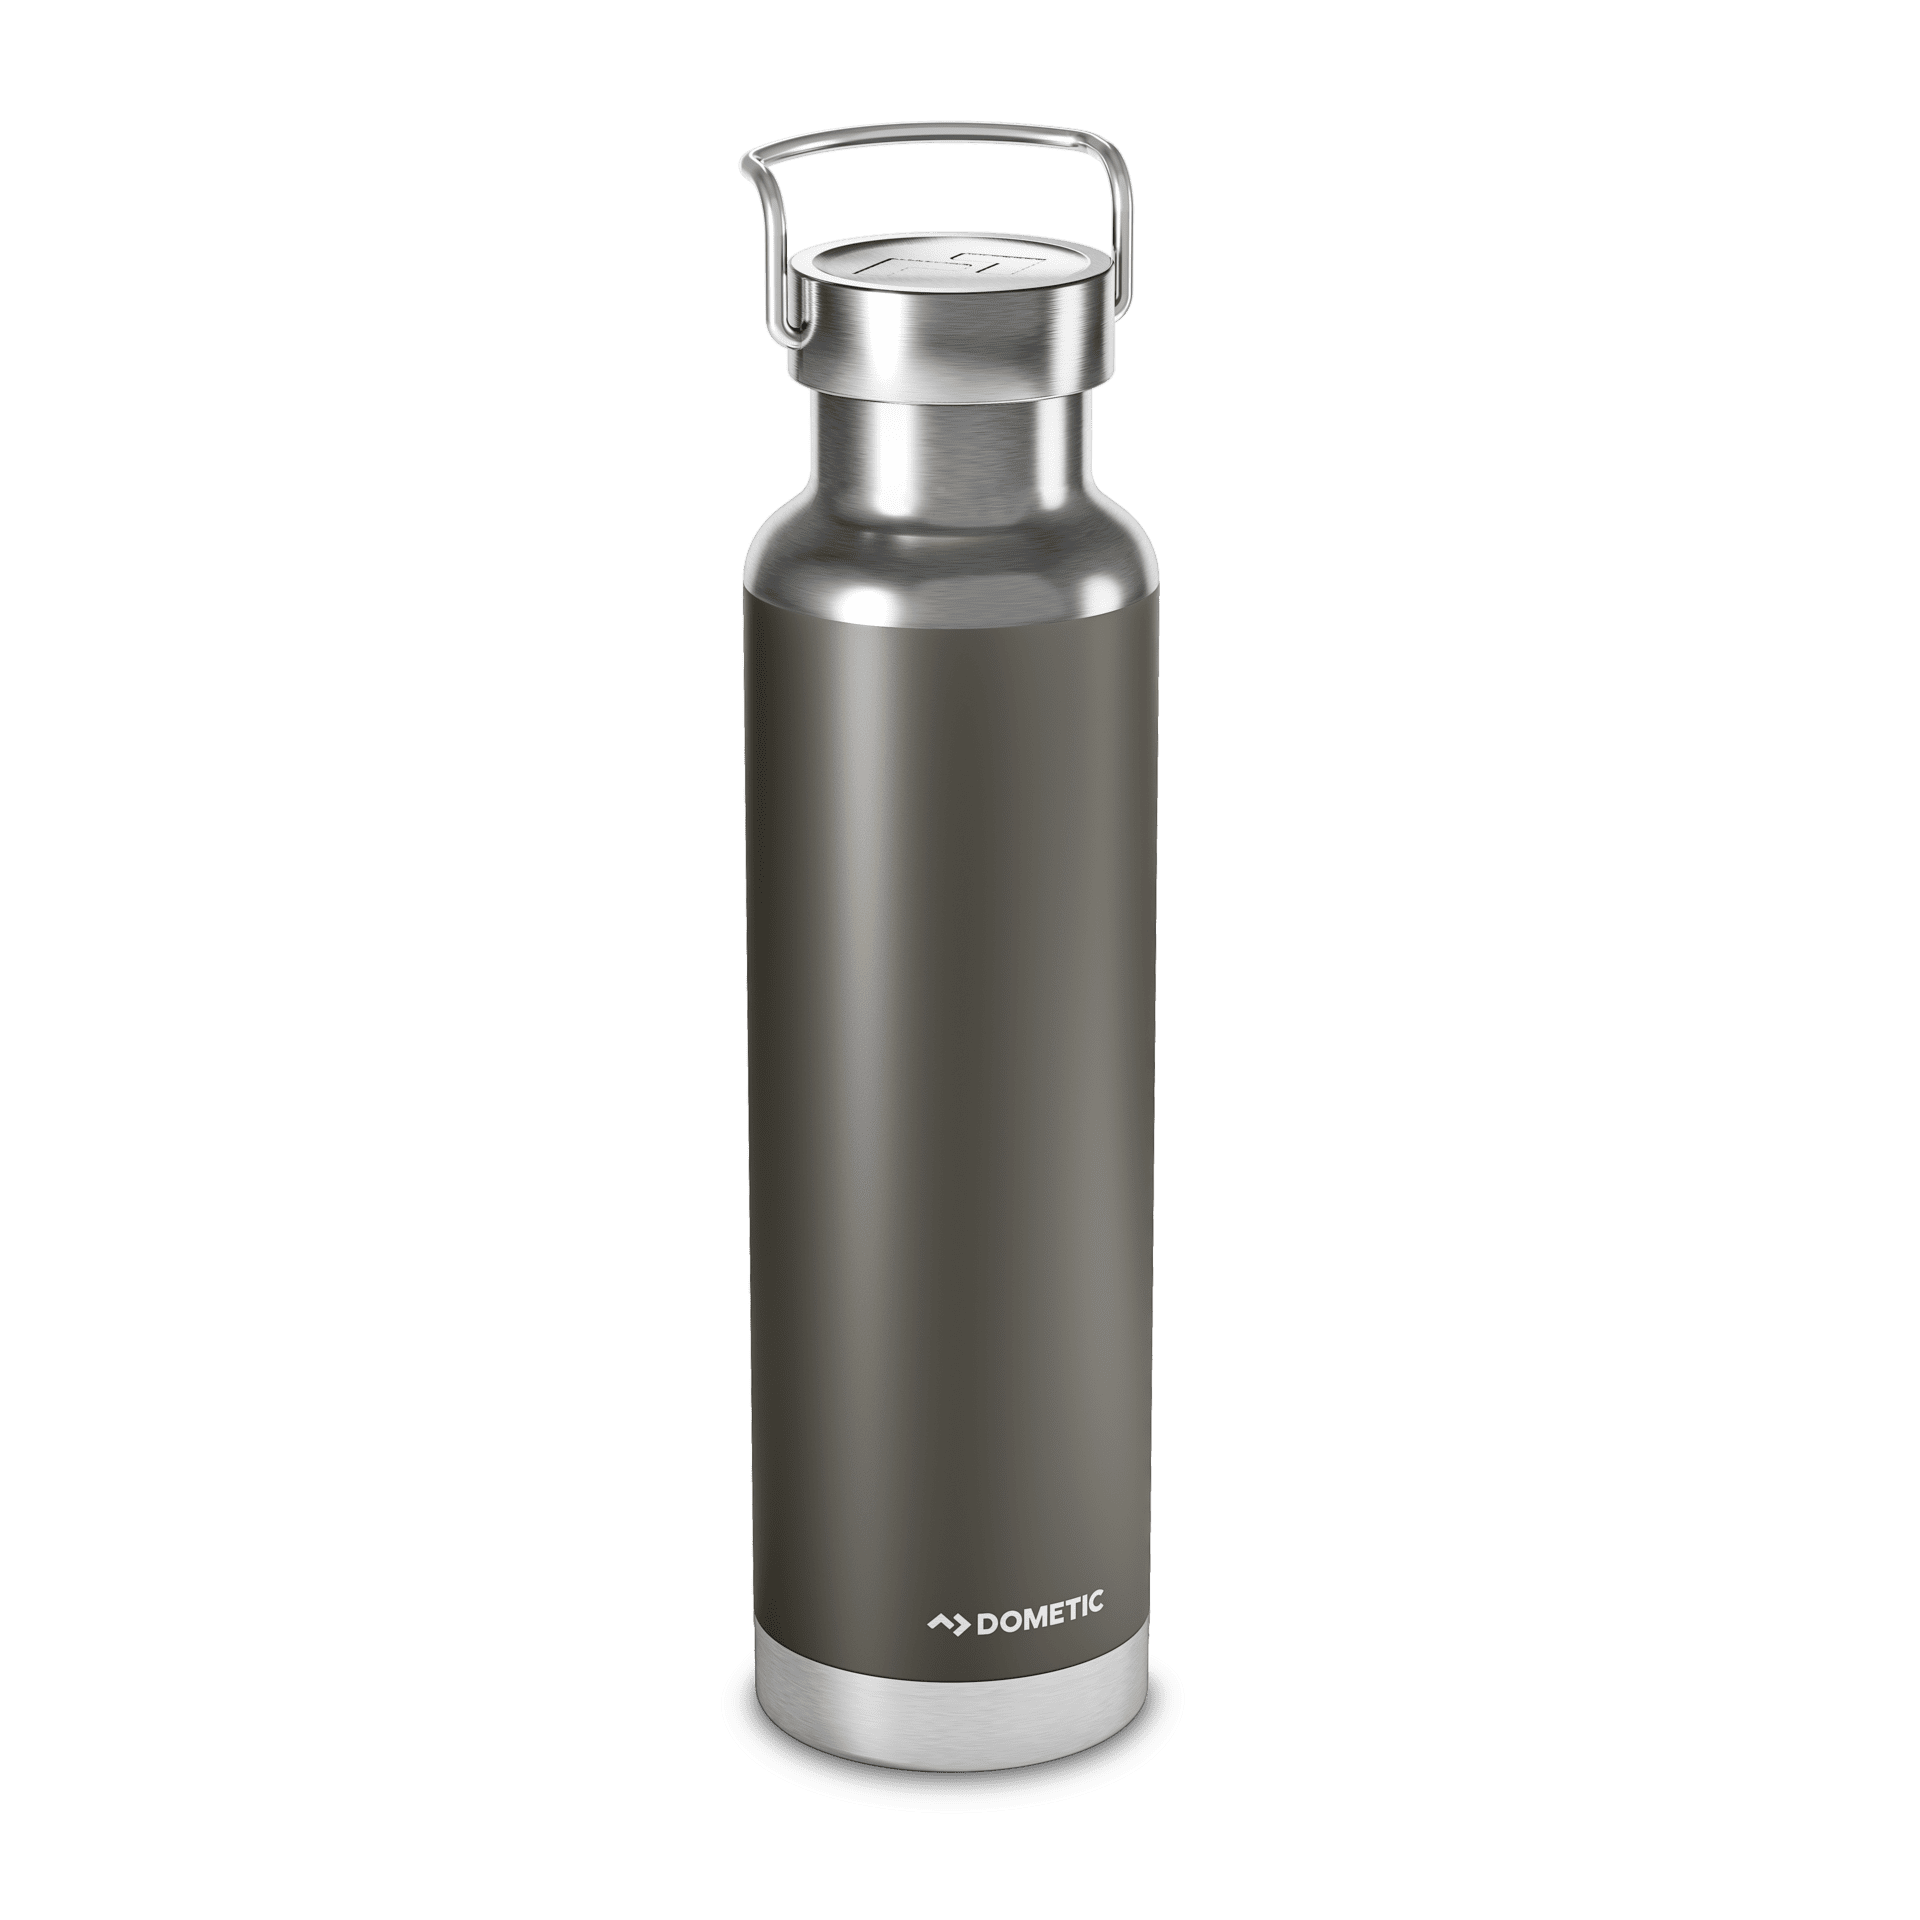 Thermos Bottle PNG Free Image